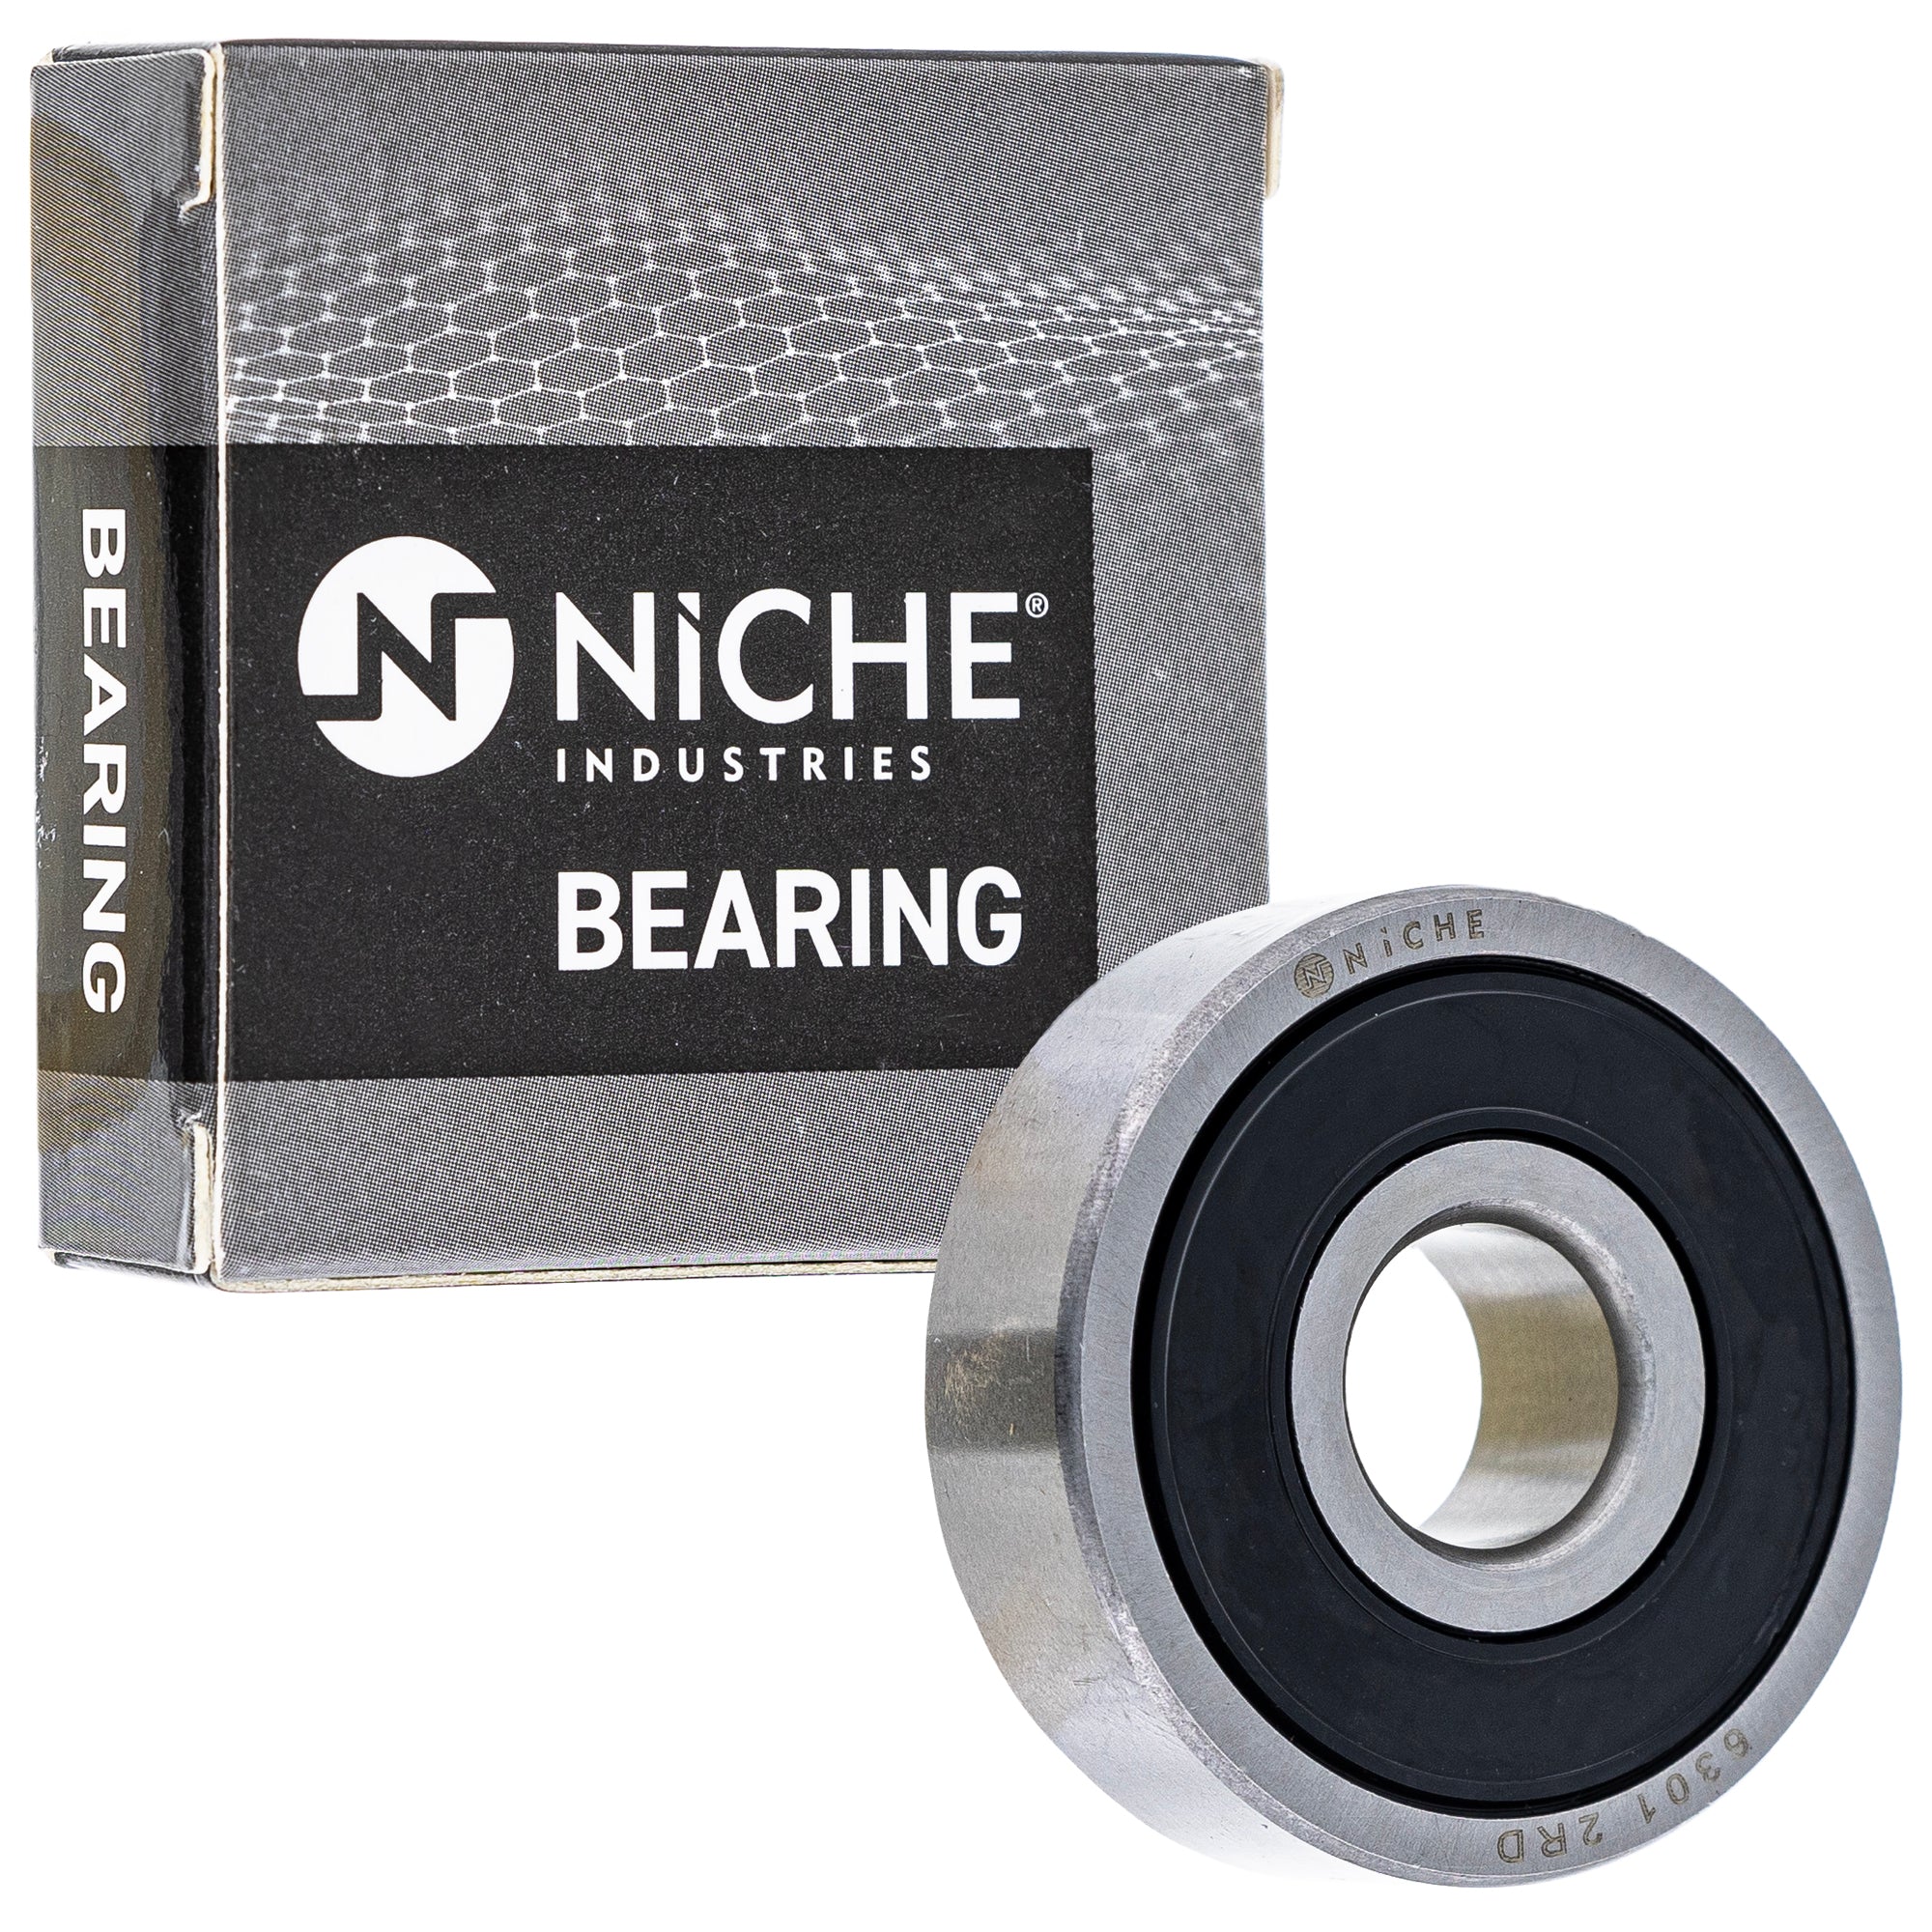 NICHE 519-CBB2342R Bearing & Seal Kit 2-Pack for zOTHER ZB50 XR80R